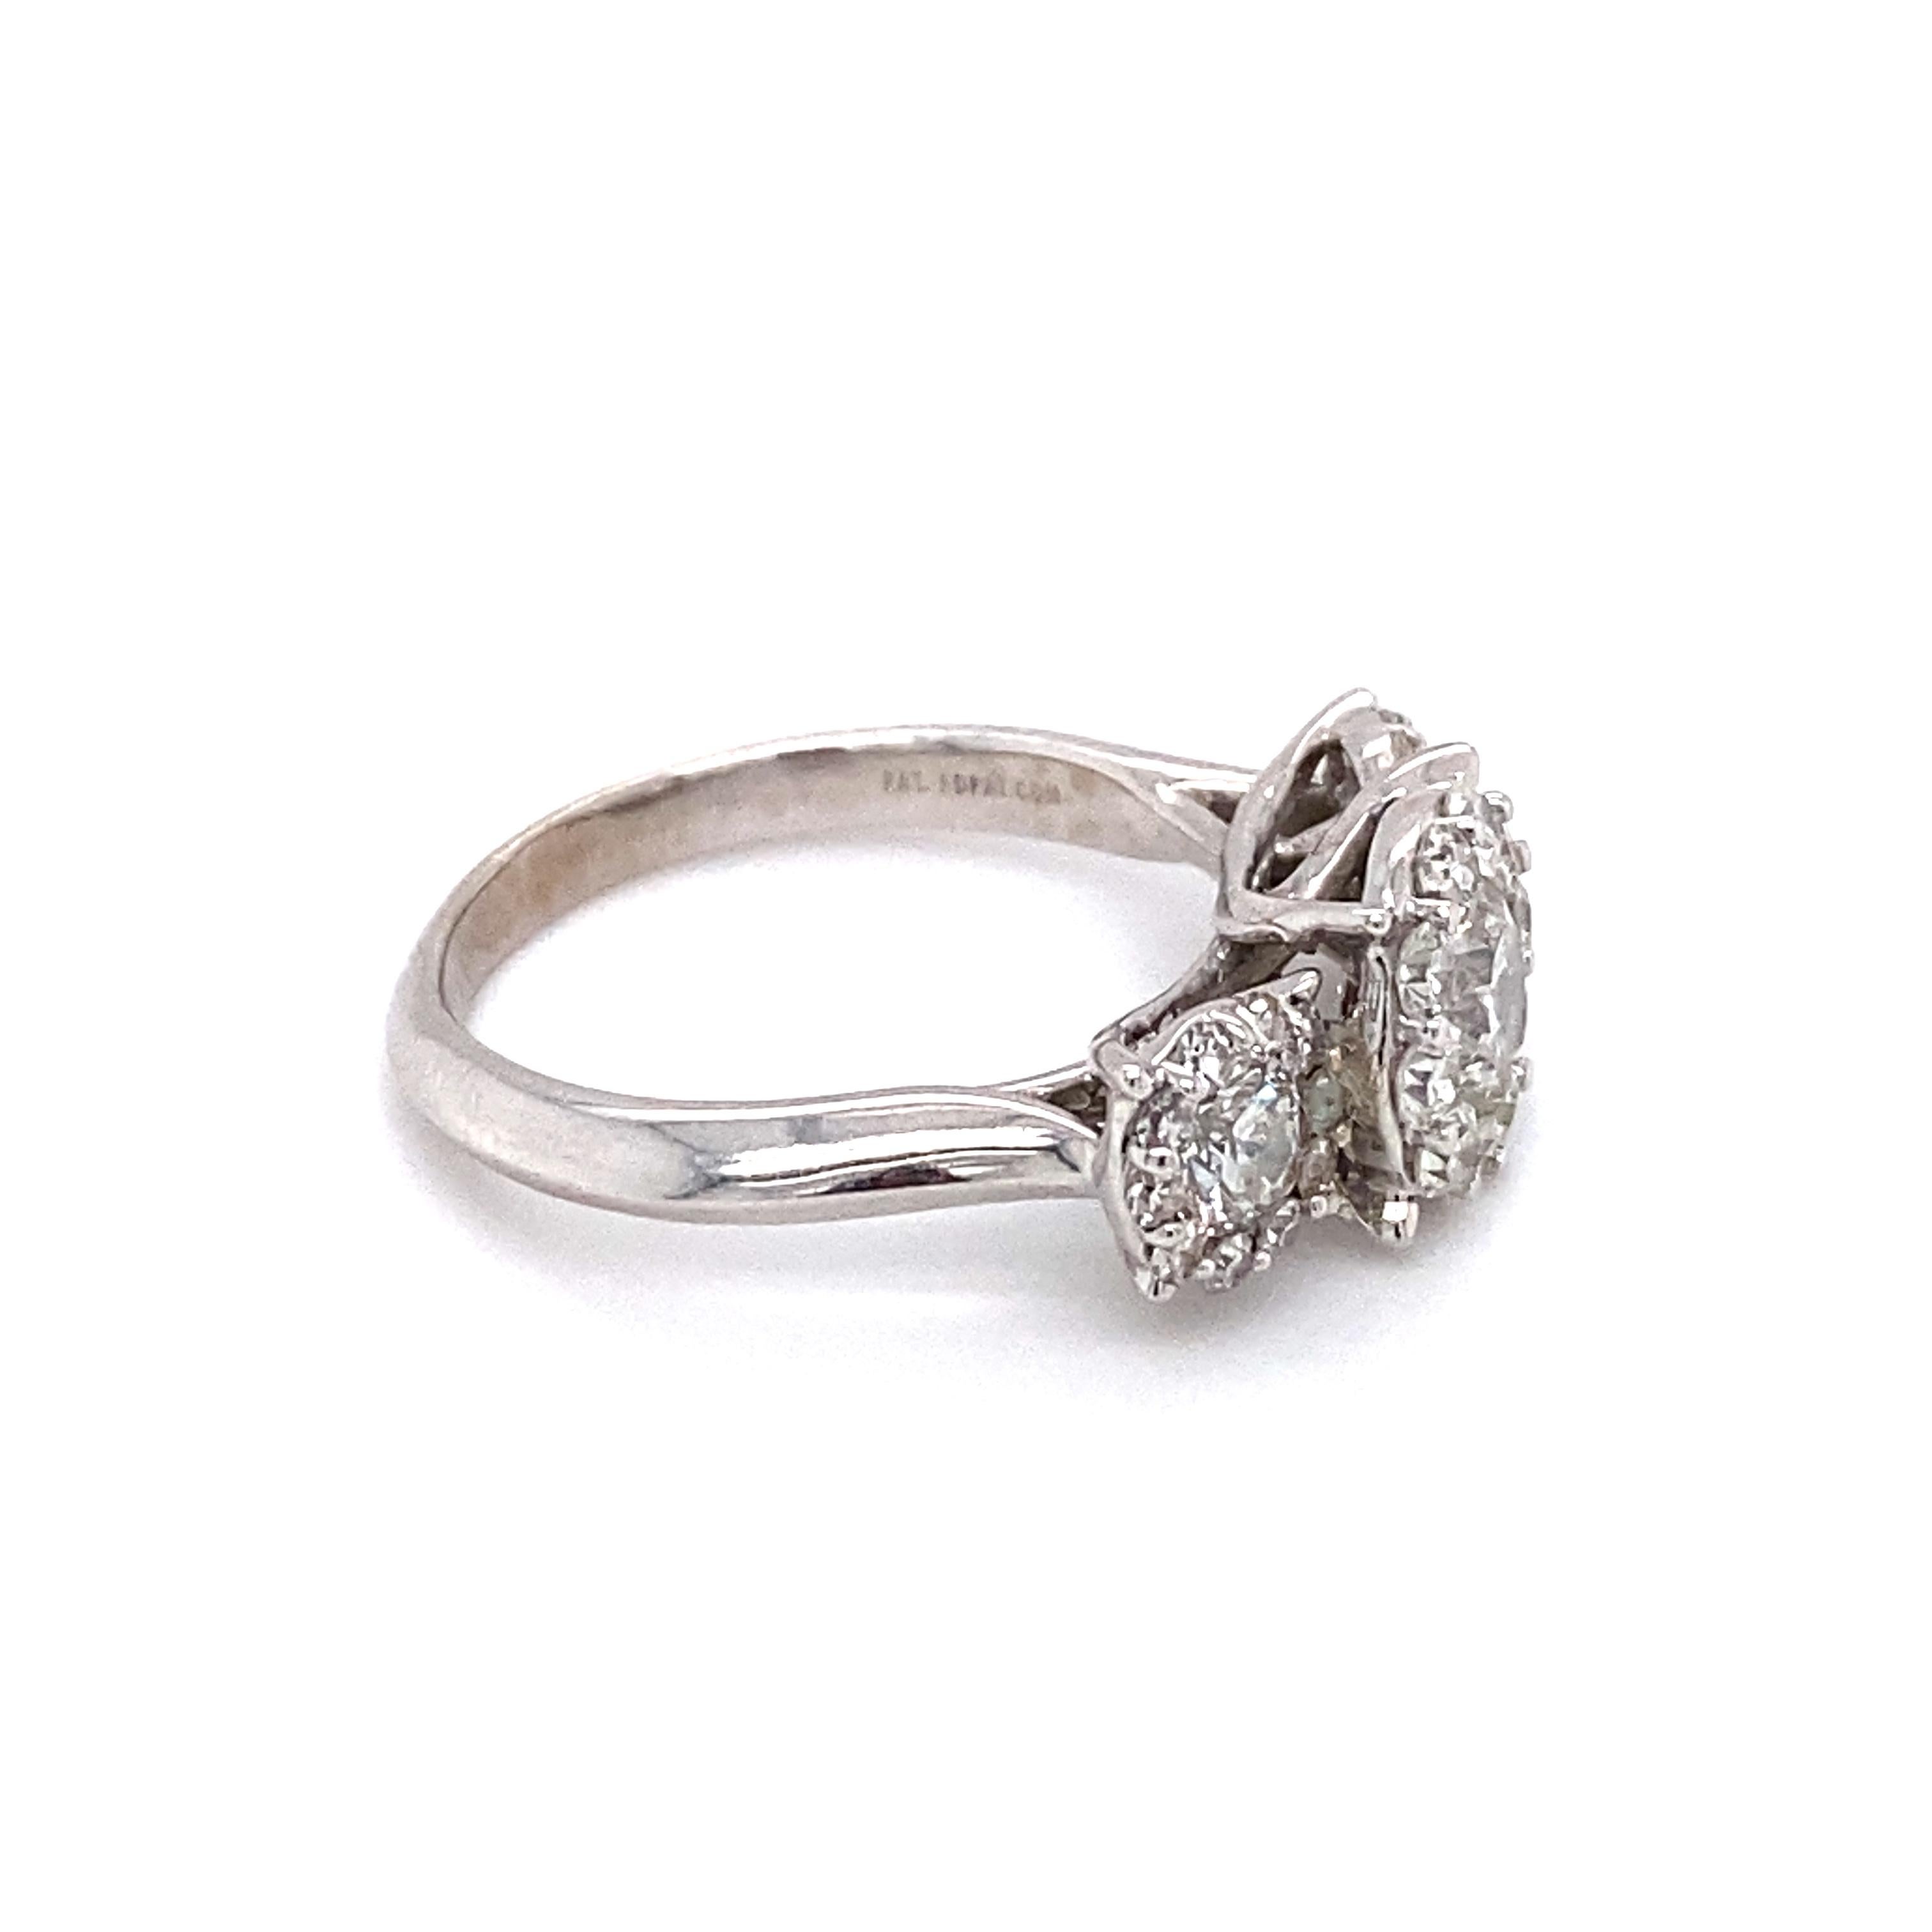 Modern Circa 1990s Three Stone Diamond Cluster Ring in 14K White Gold For Sale